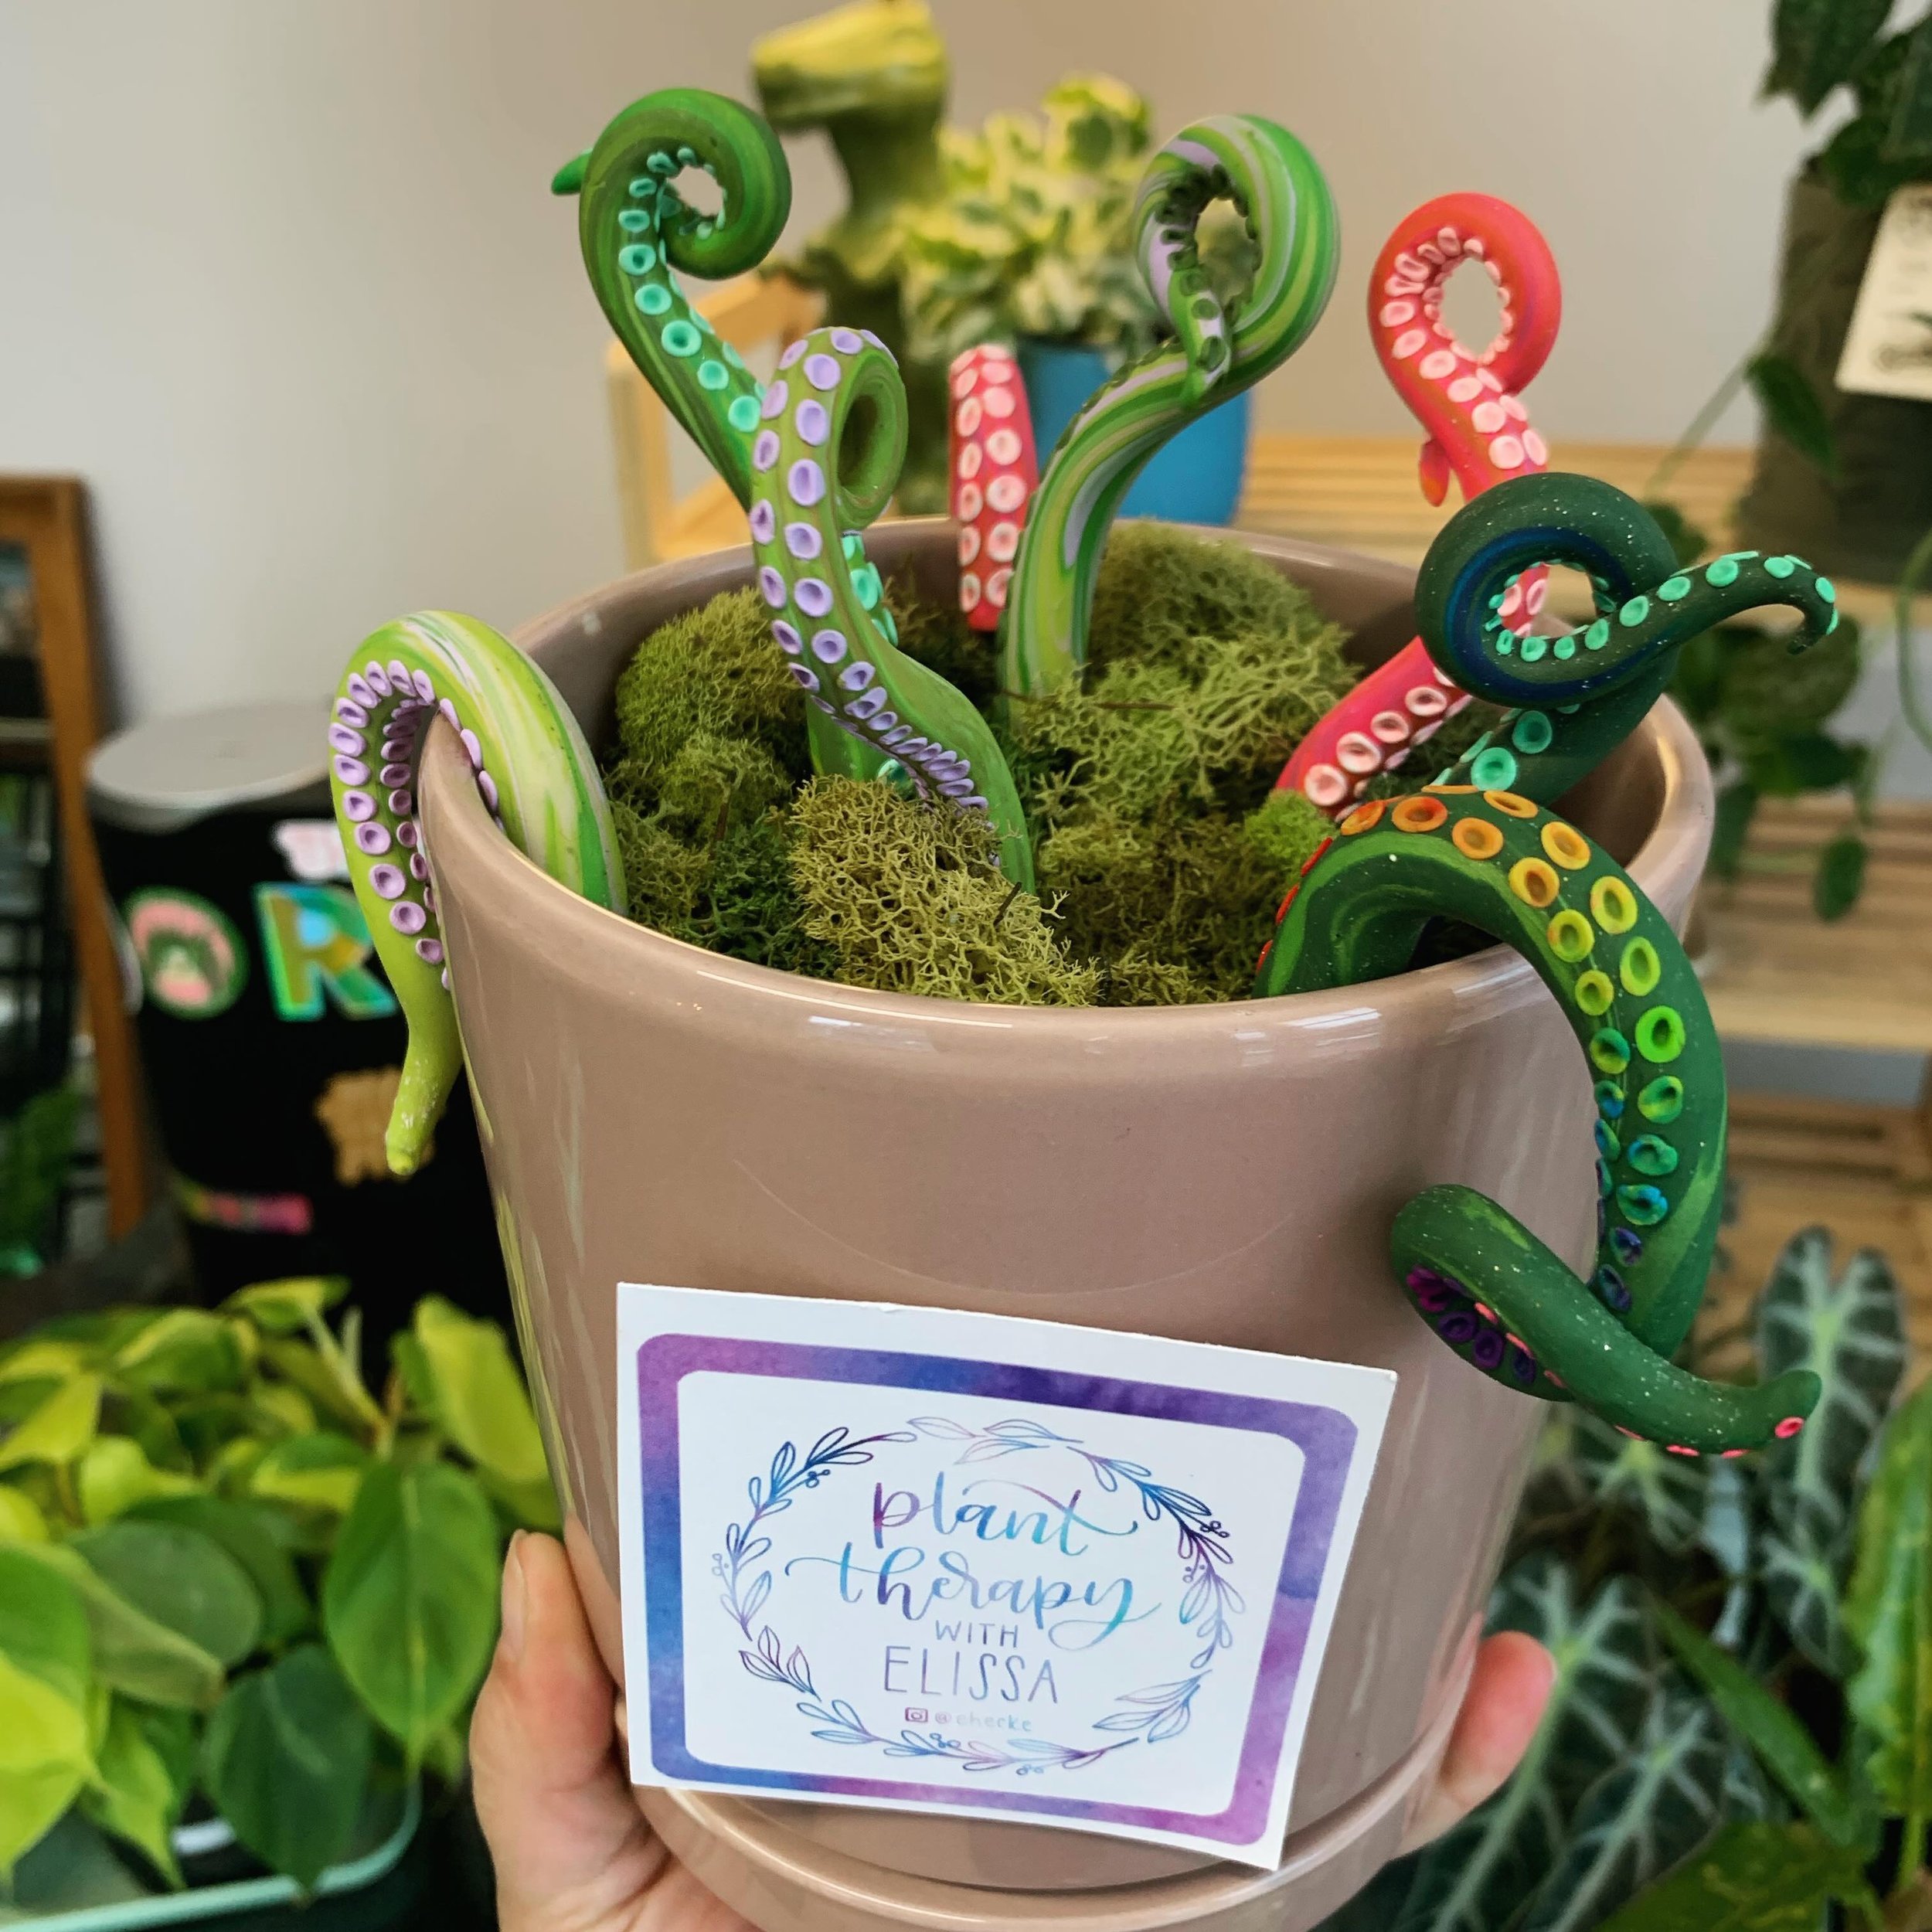 ✨🪴Restock on plant tentacles from @planttherapywithelissa 

Open 11-4p Today

#smallbusiness #shoplocal #queerowned #lgbtq #houseplants #greenvibes #prana #newton #boston #handmade #ecofriendly #local